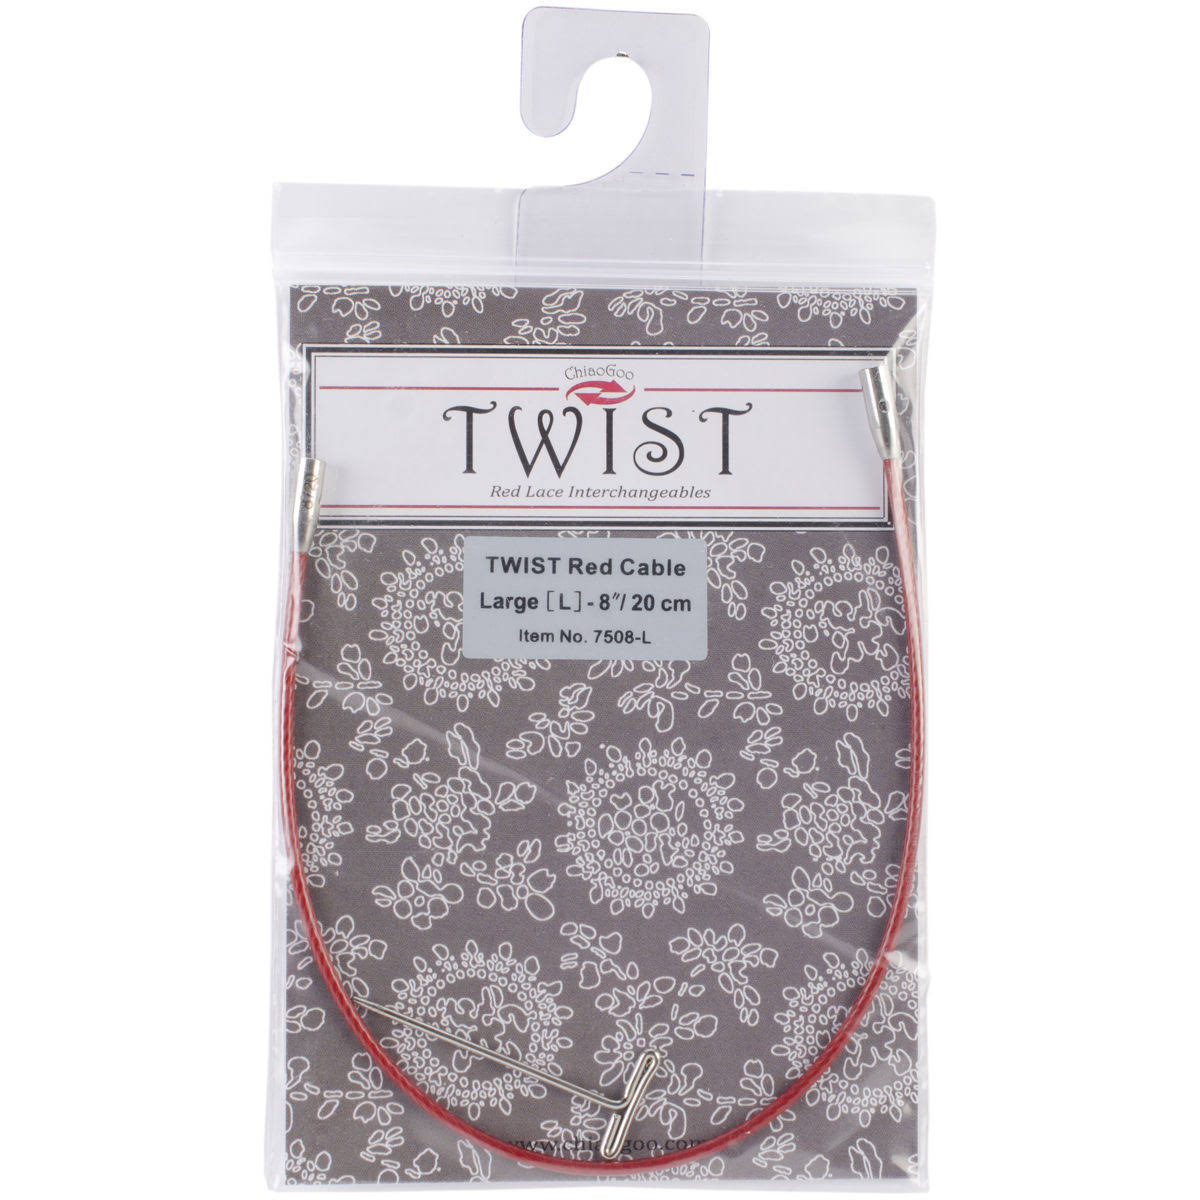 Chiaogoo Twist Red Lace Interchangeable Cables - 8", Large